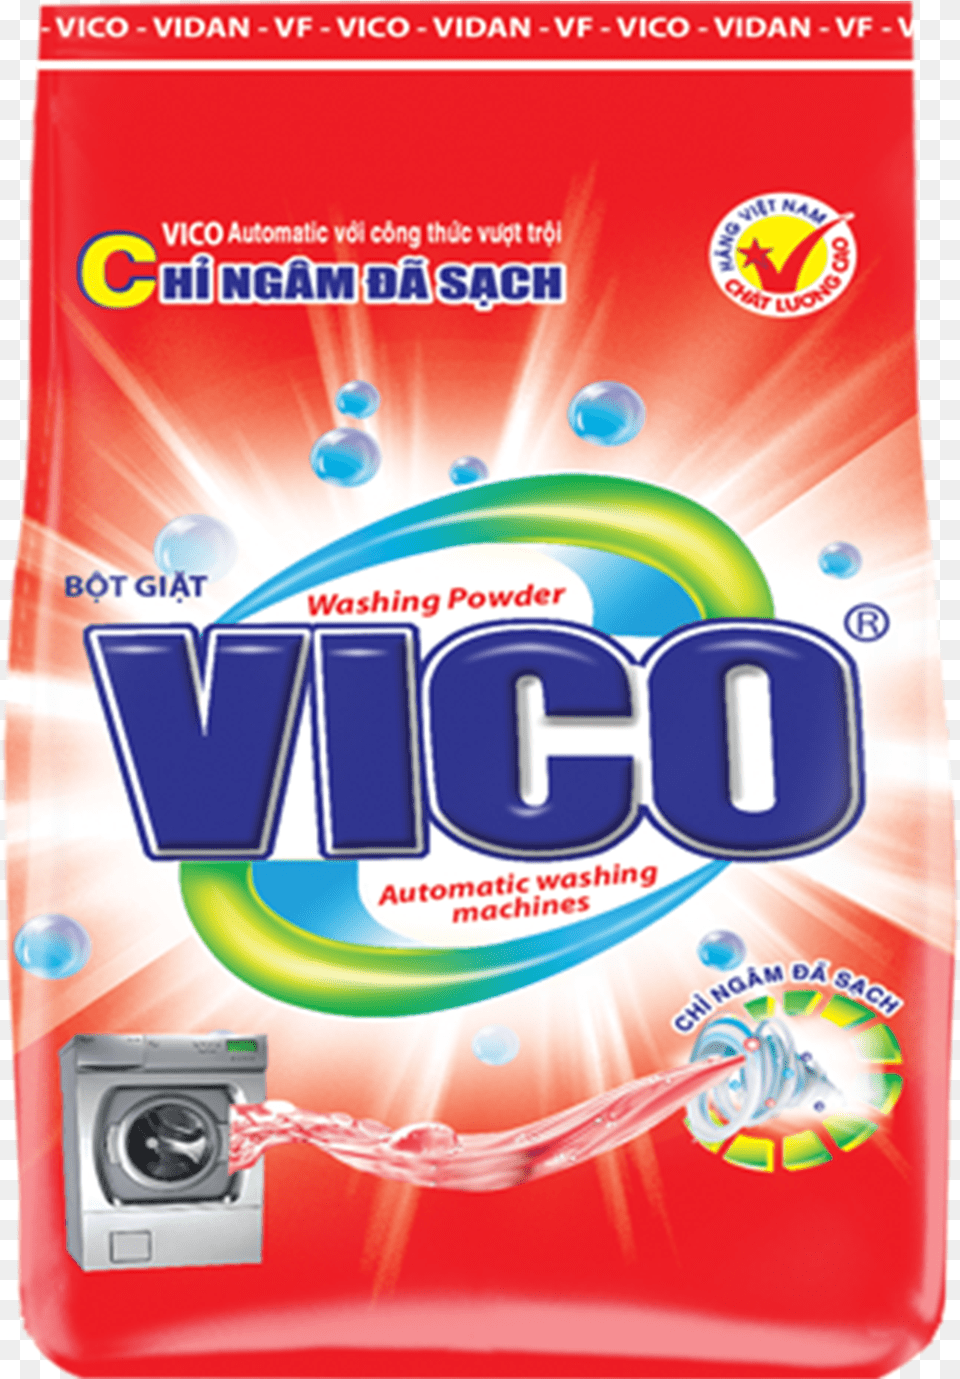 Vico Detergent Powder Bt Git Vico, Gum, Appliance, Device, Electrical Device Free Png Download